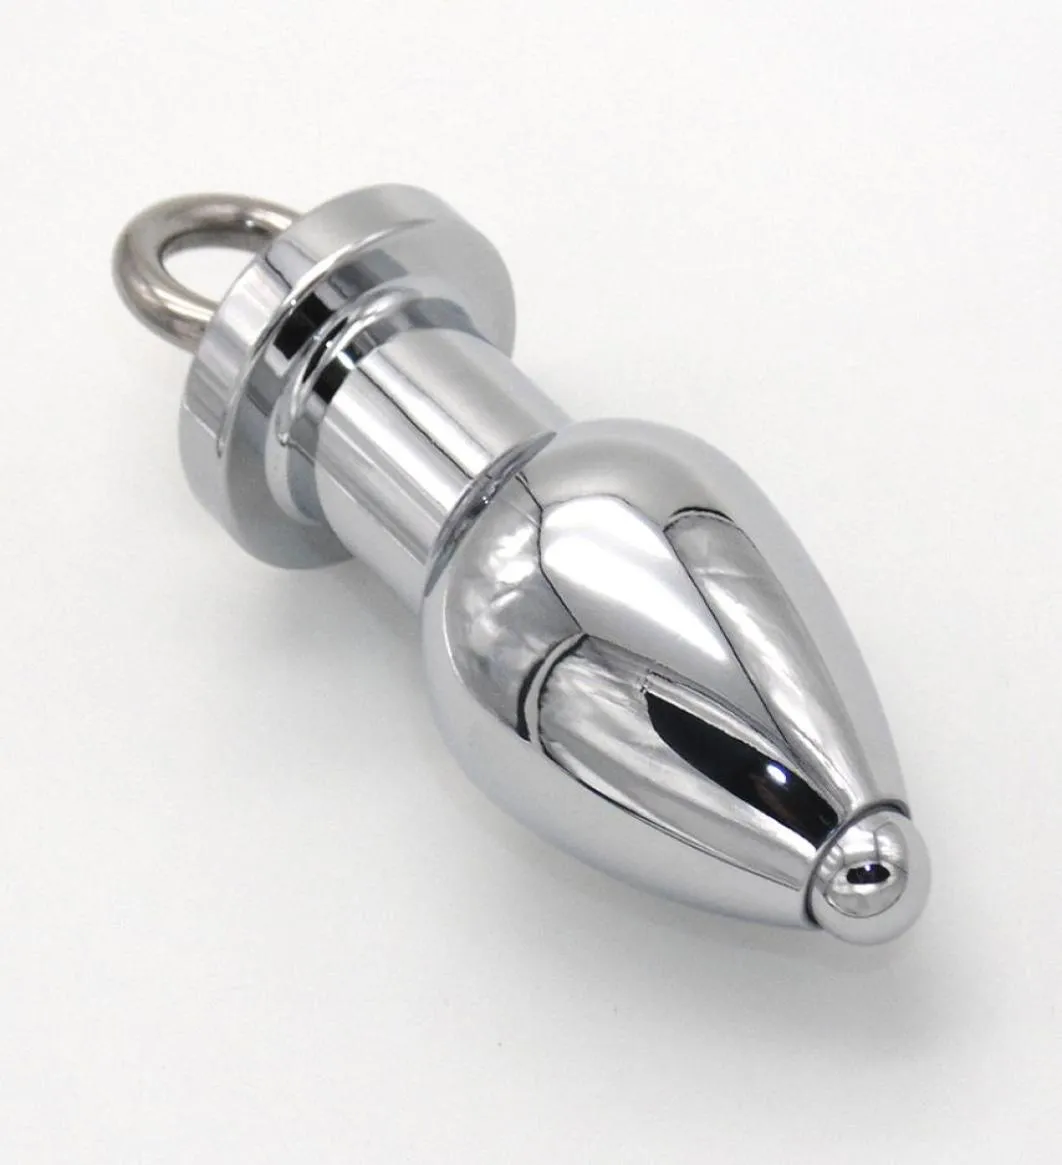 Big Innewless Steel Butt Plug Gay Anal Sex Toys for Men and Women4617727